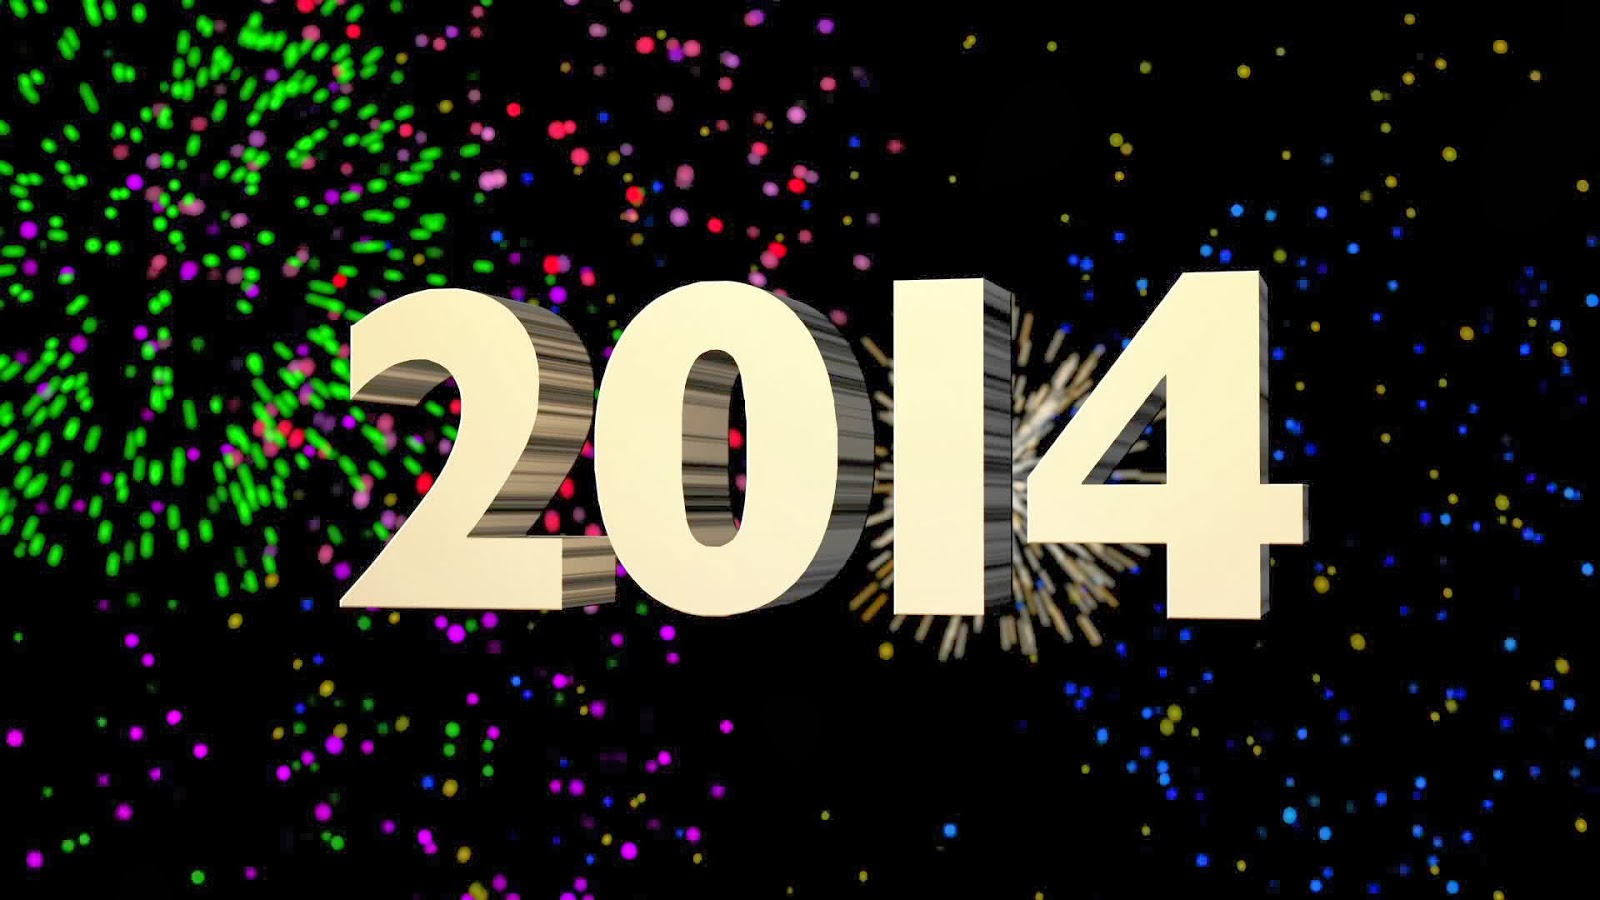 Happy New Year 2014 wallpaper hd download for free: Happy 